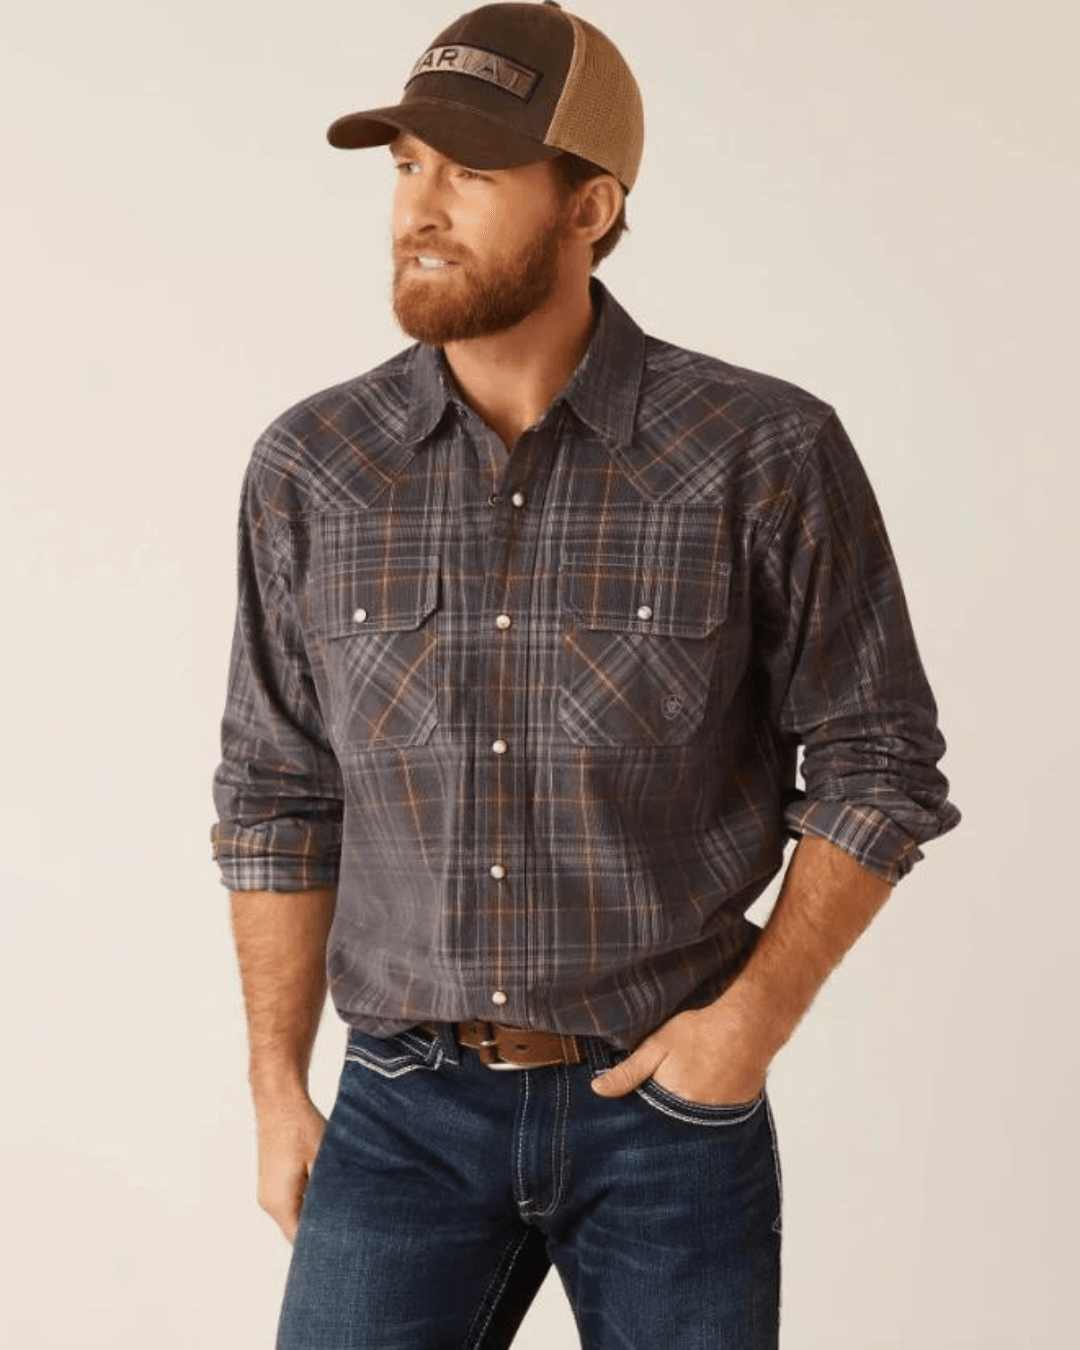 Men's Western Shirts - Painted Cowgirl Western Store